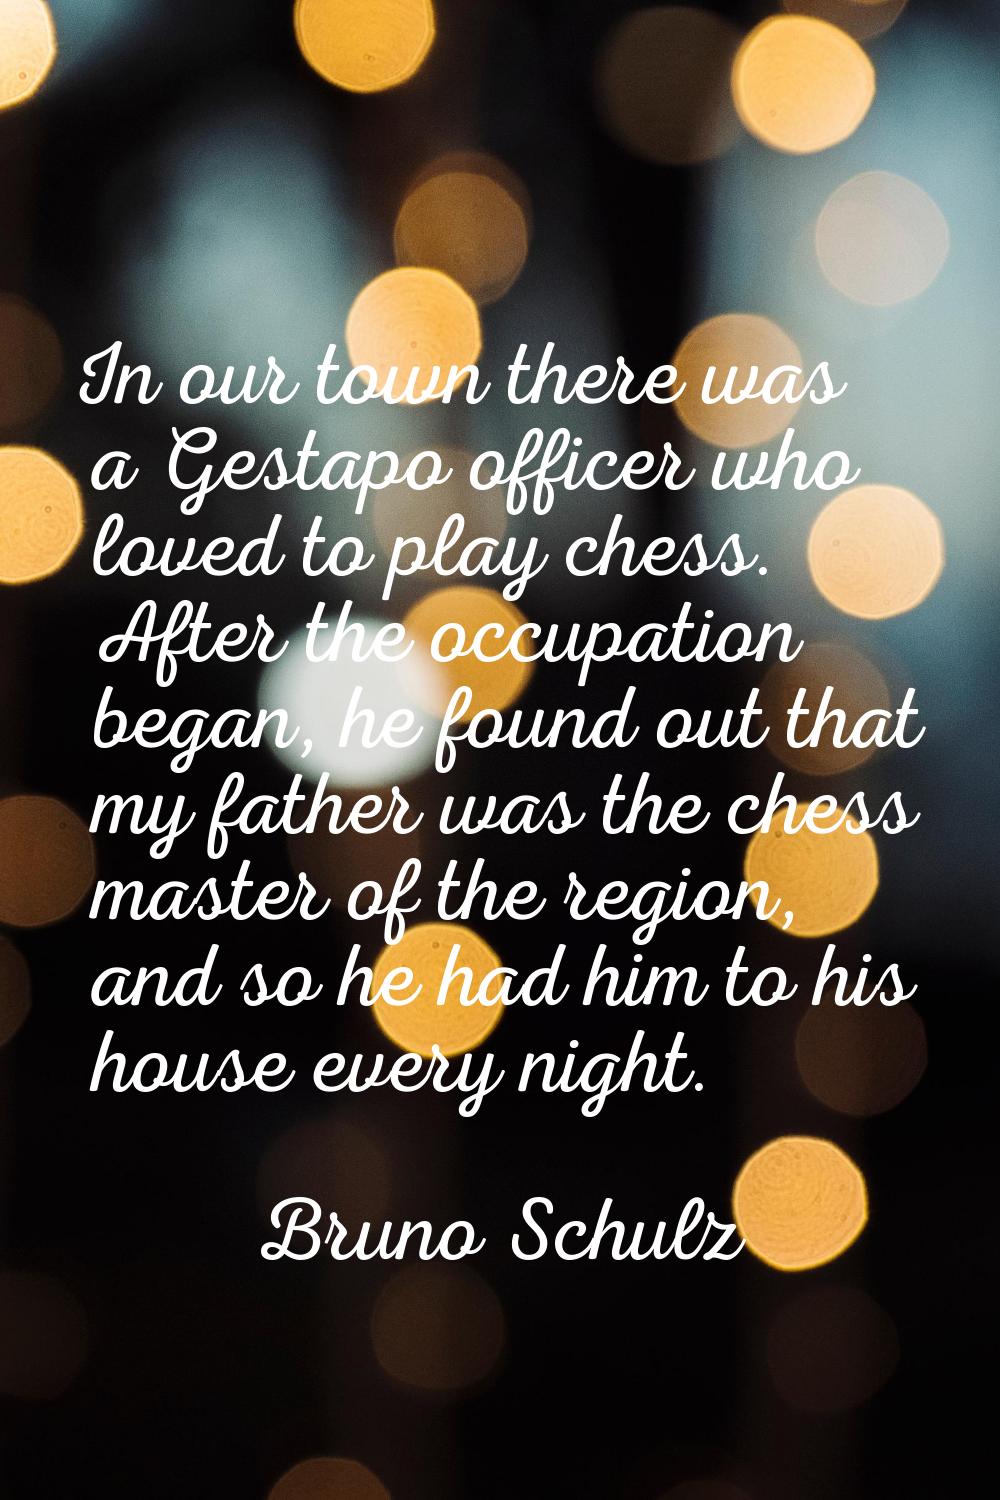 In our town there was a Gestapo officer who loved to play chess. After the occupation began, he fou